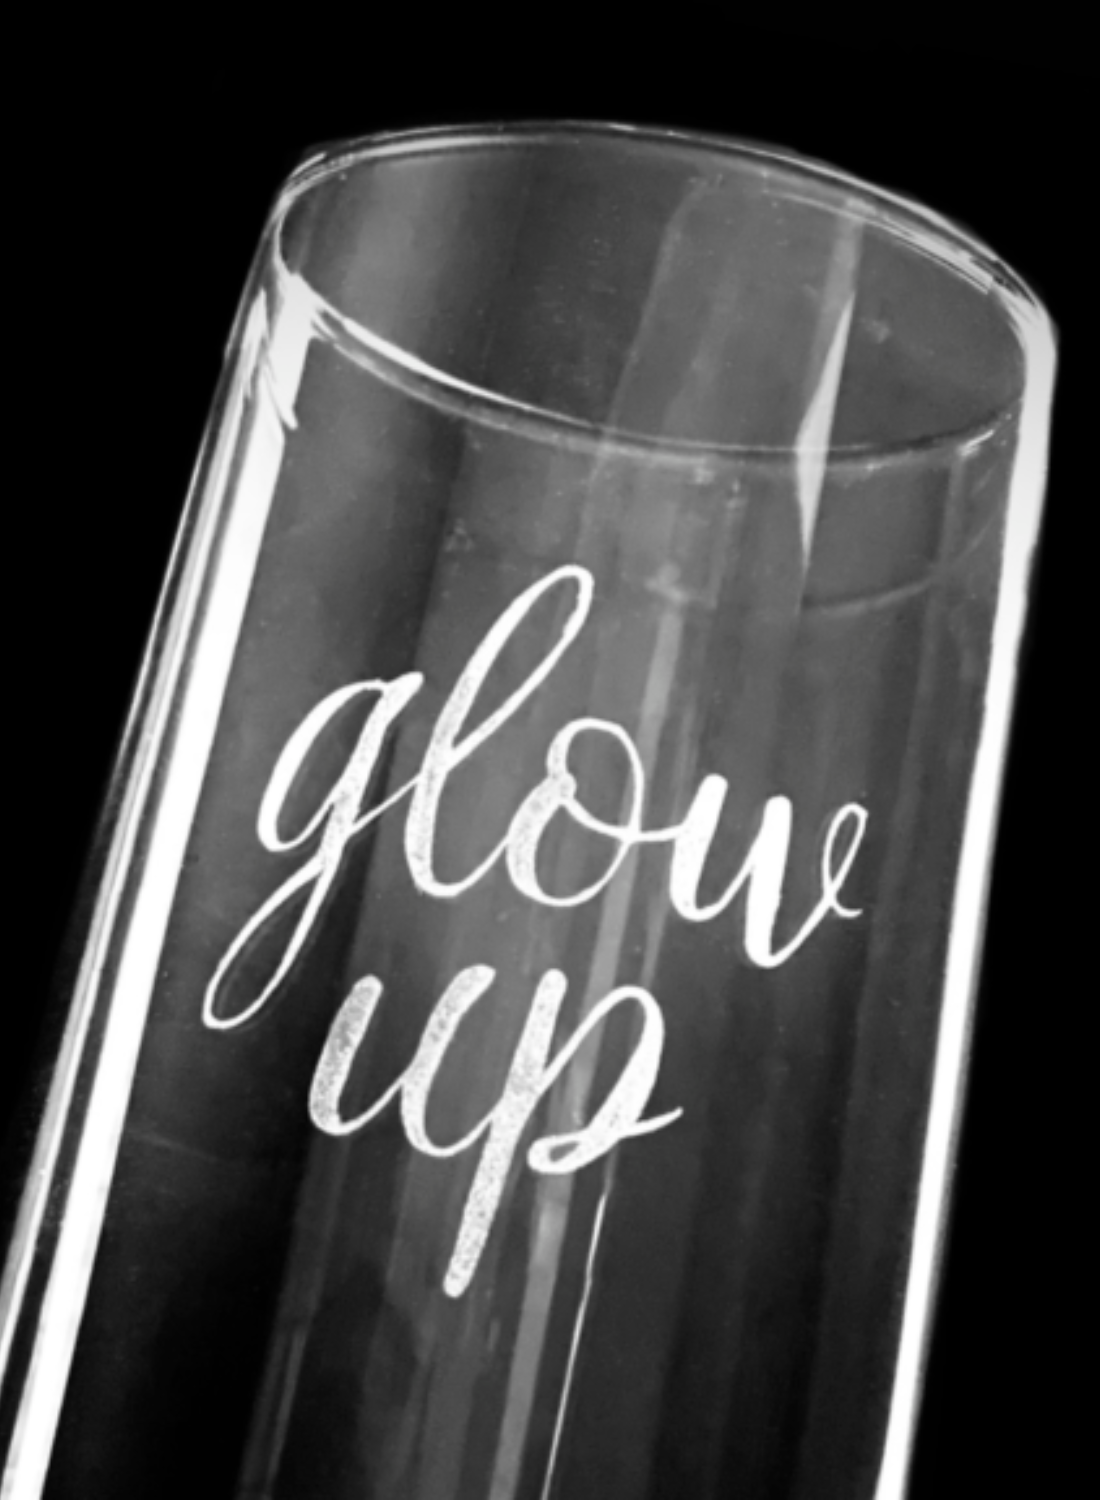 Elegantly etched glassware pieces with intricate designs by Creative Adventure Co.